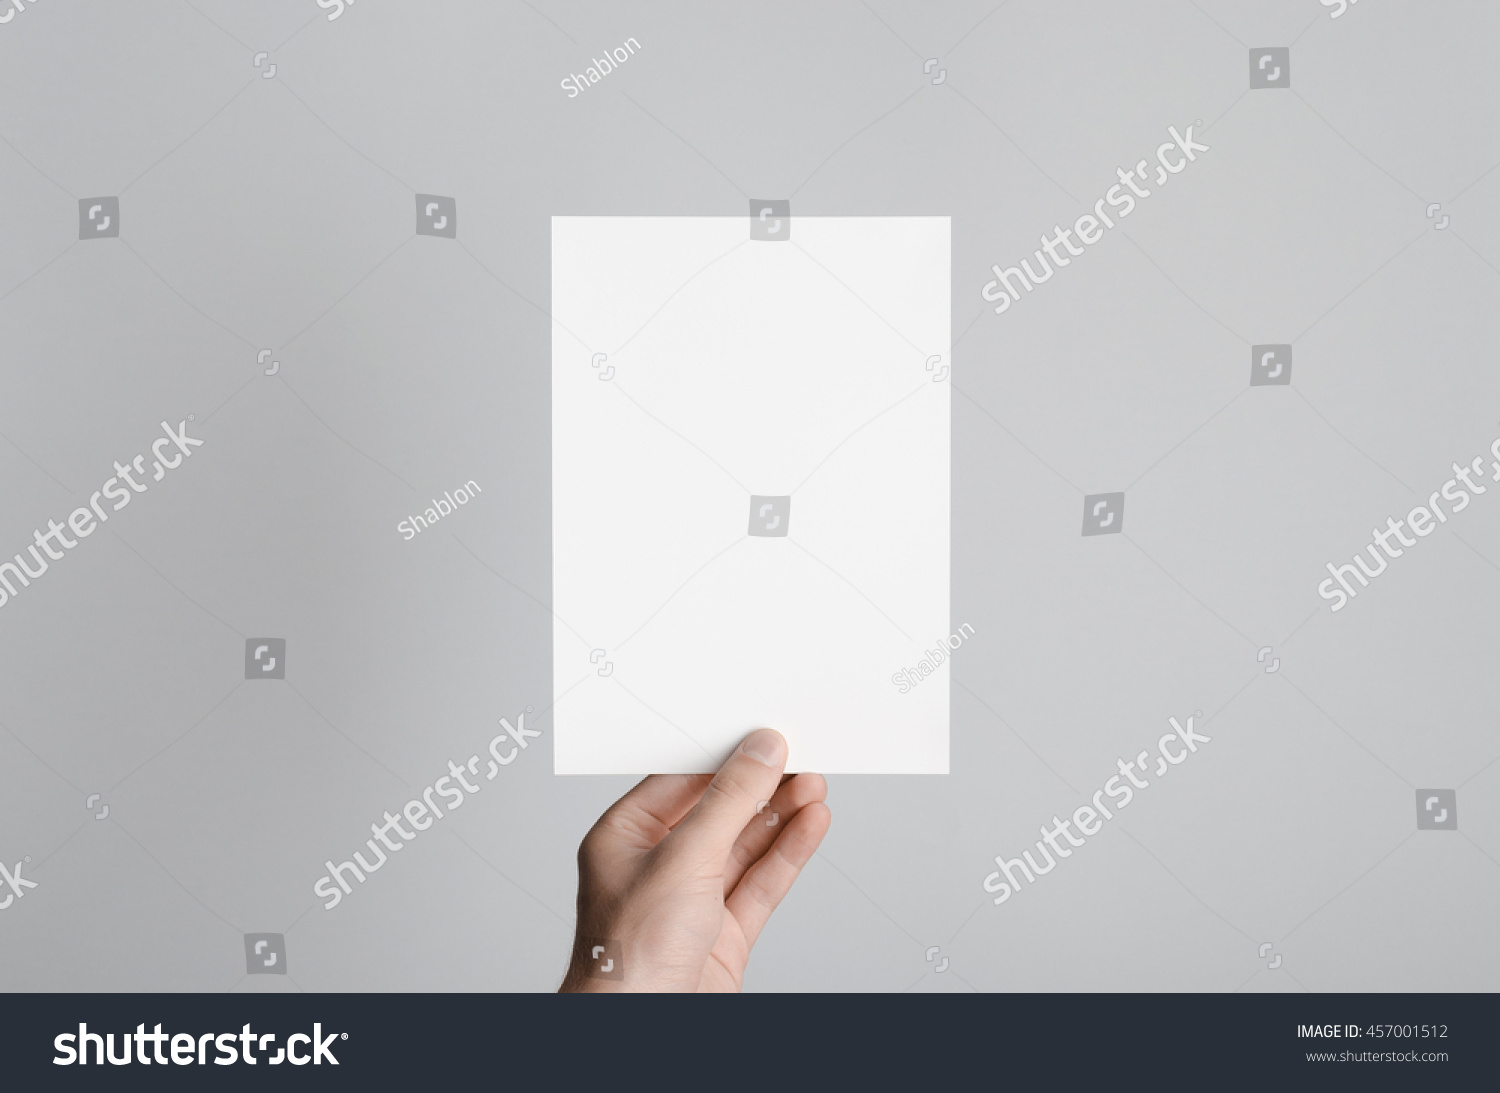 A5 Flyer / Invitation Mock-Up - Male hands holding a blank flyer on a gray background. #457001512